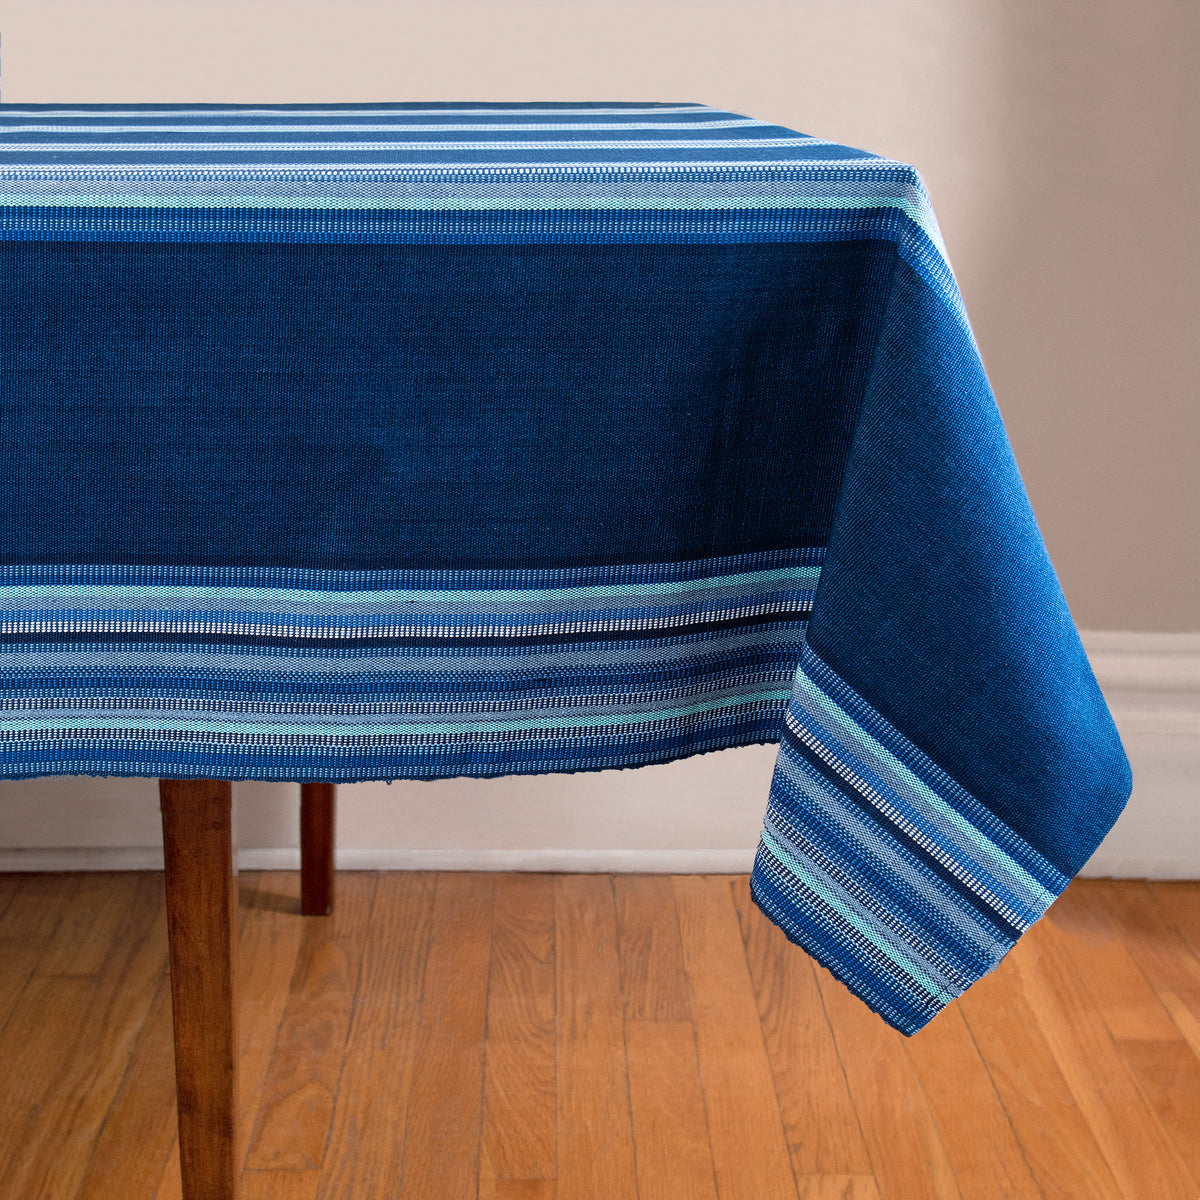 Tablecloth with stripes in blues and indigo